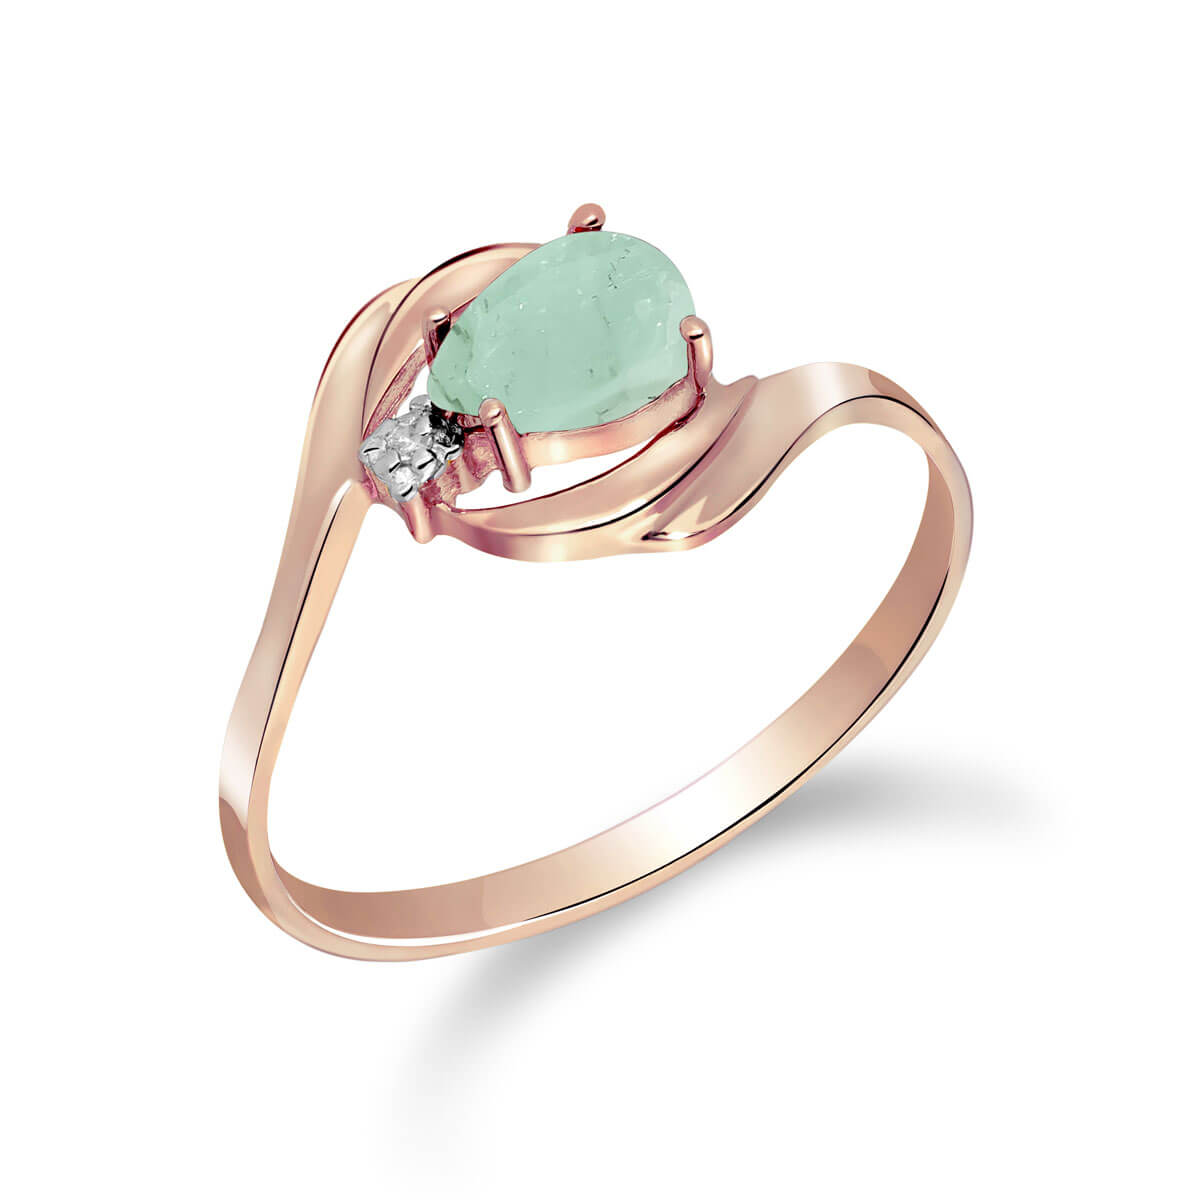 Emerald & Diamond Flare Ring in 9ct Rose Gold